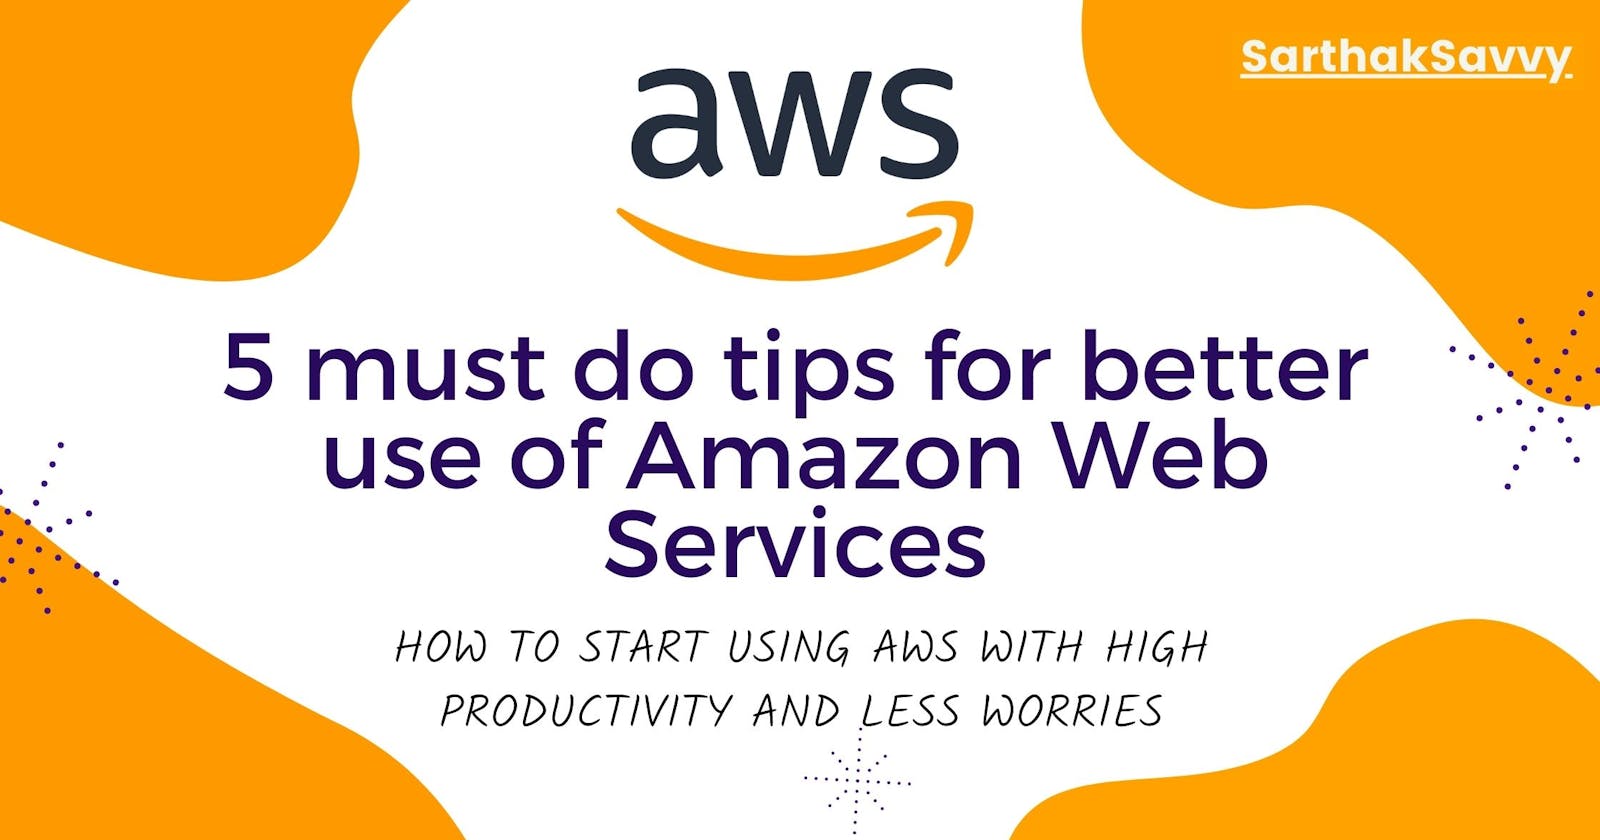 5 must do tips for better use of Amazon Web Services